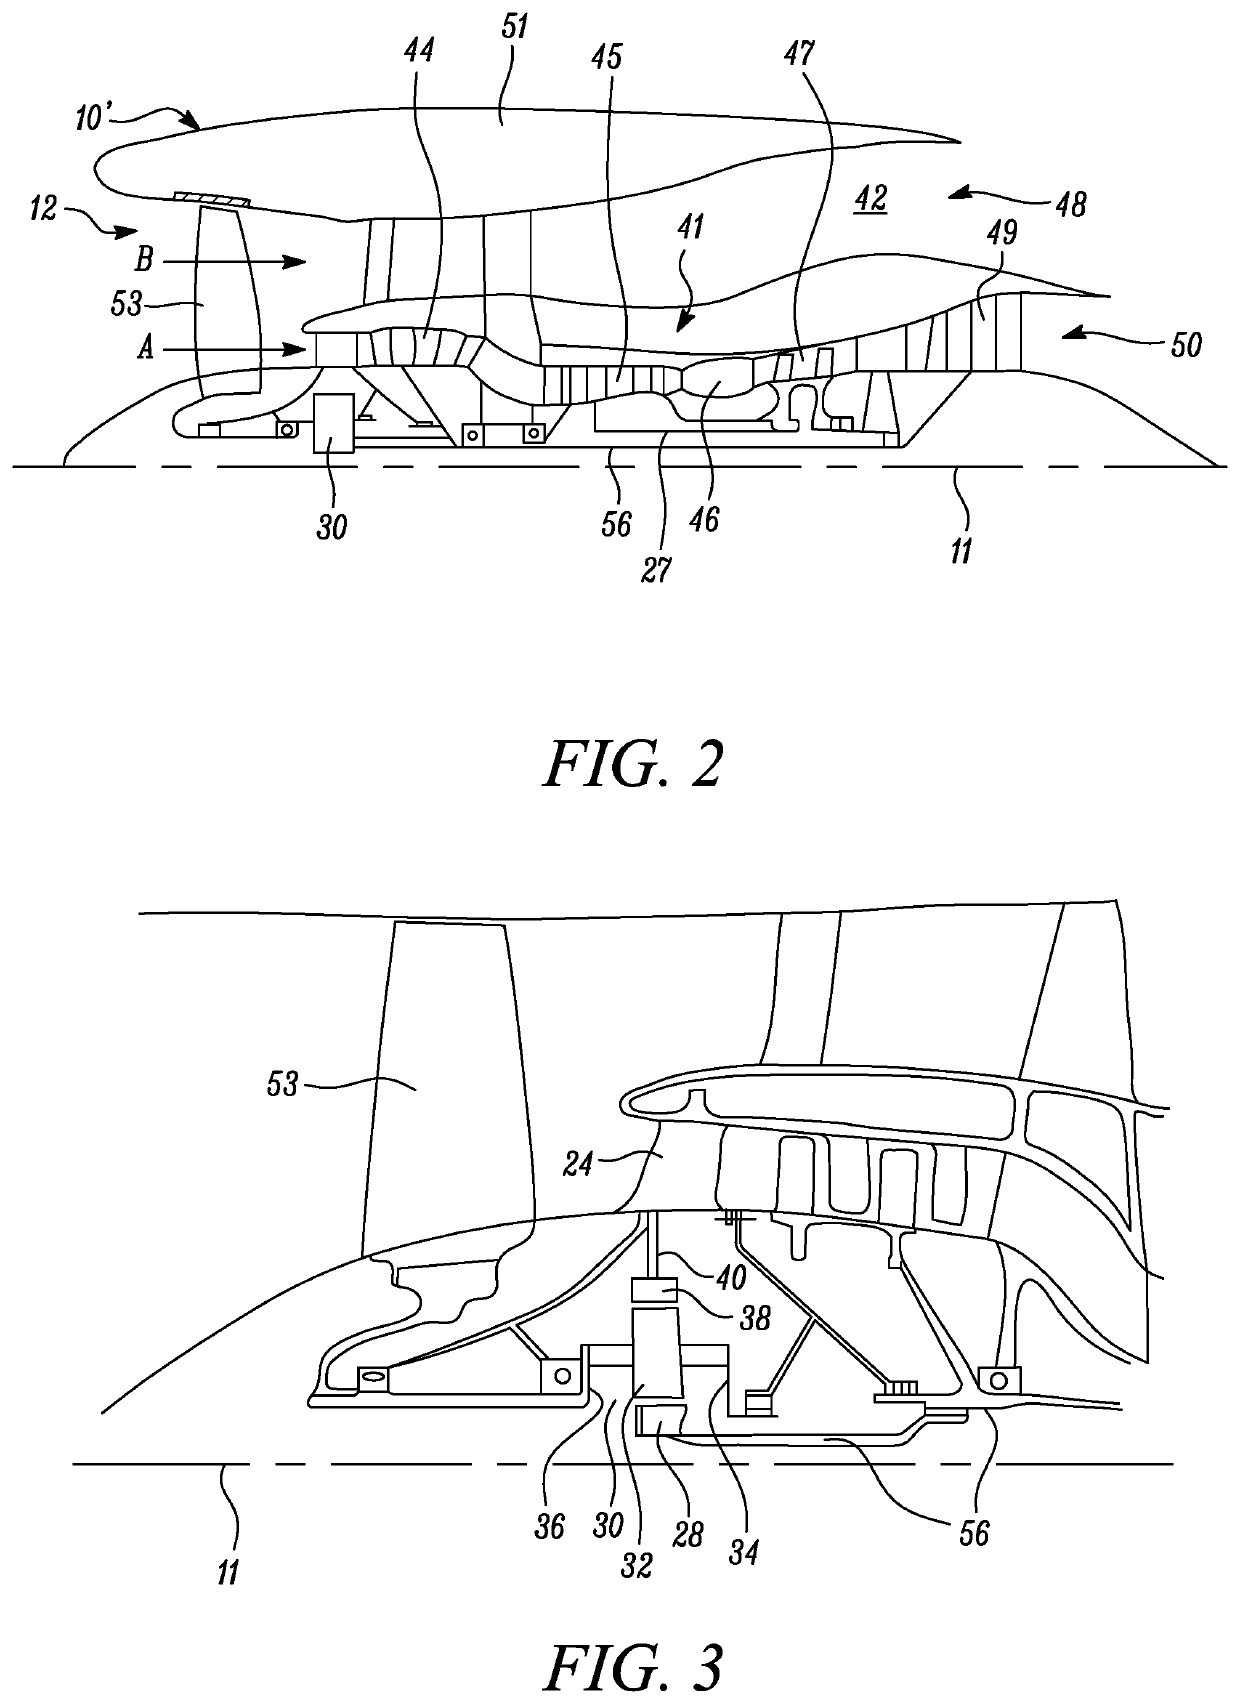 Modular cabin blower system for aircraft